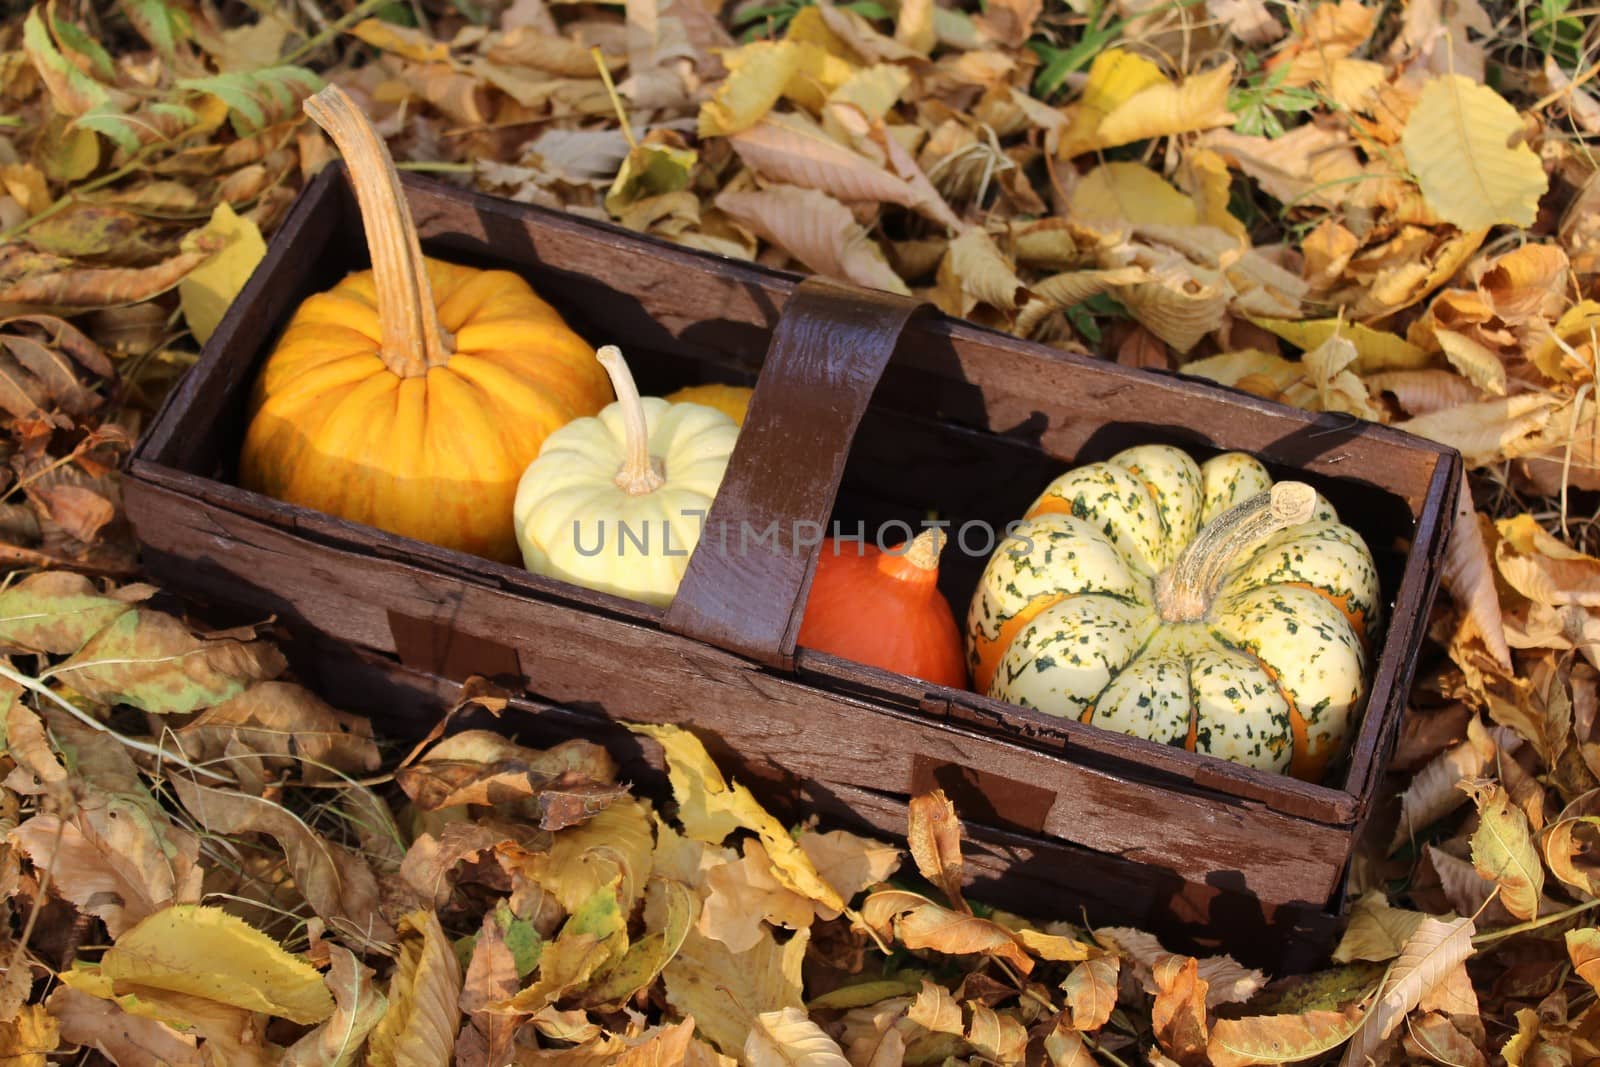 The picture shows pumpkins in a basket in autumn leaves